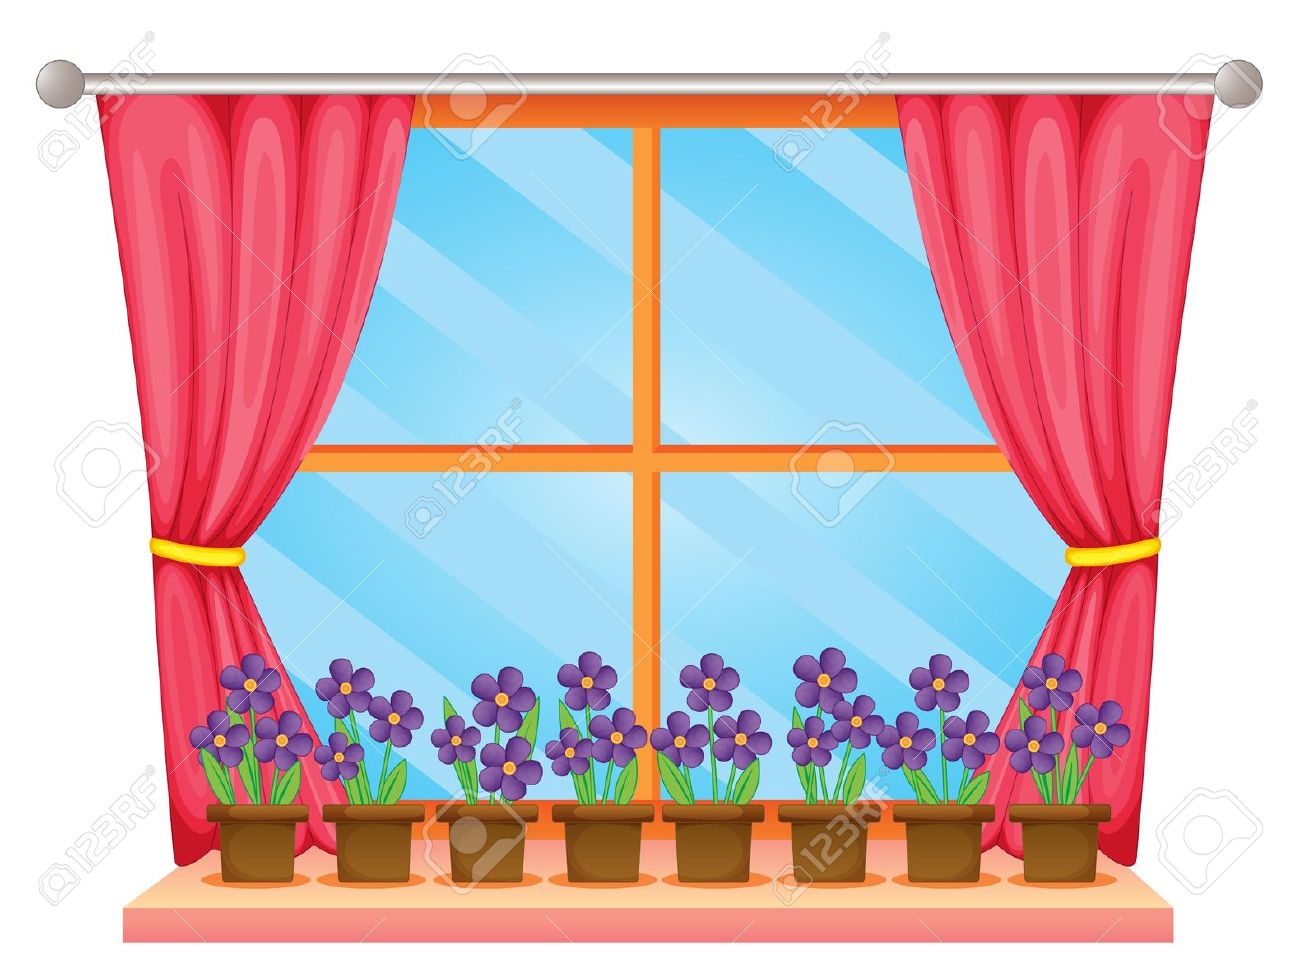 Free Outside Windows Cliparts, Download Free Clip Art, Free.